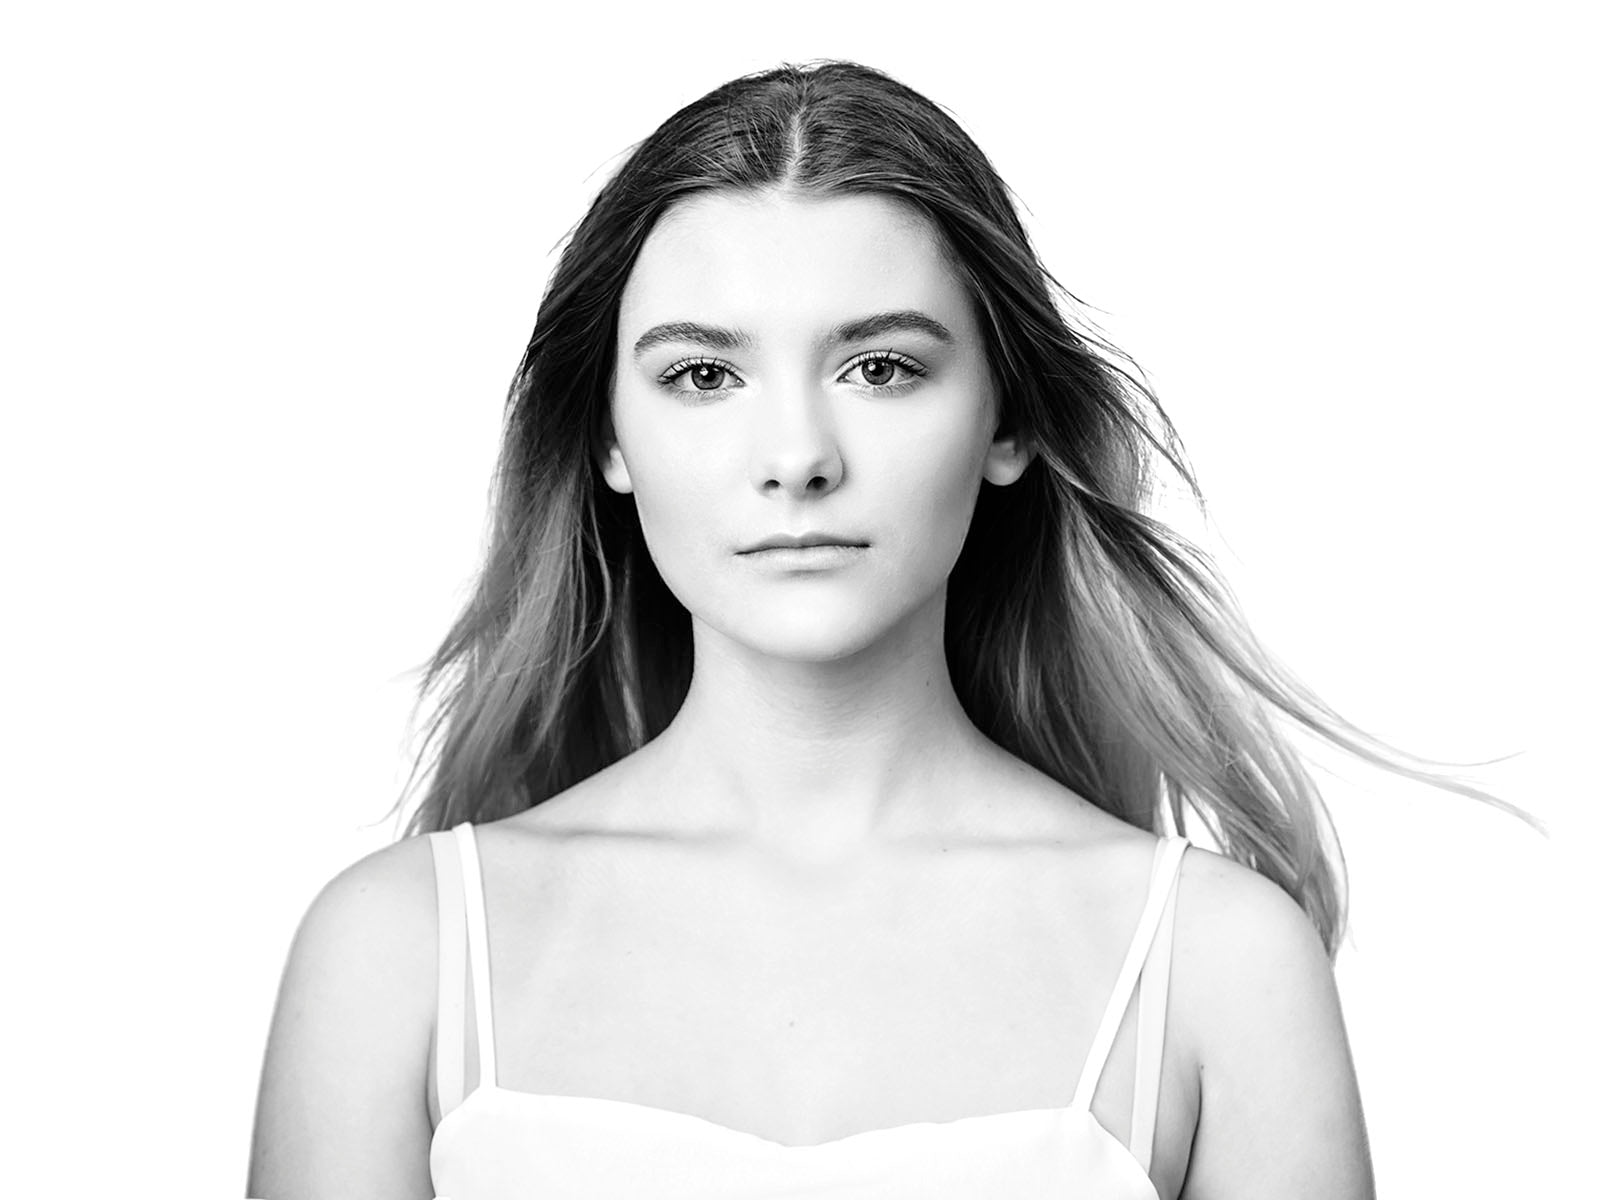 The monochrome image accompanying this product shows a young woman, photographed in the studio by Paul Holland